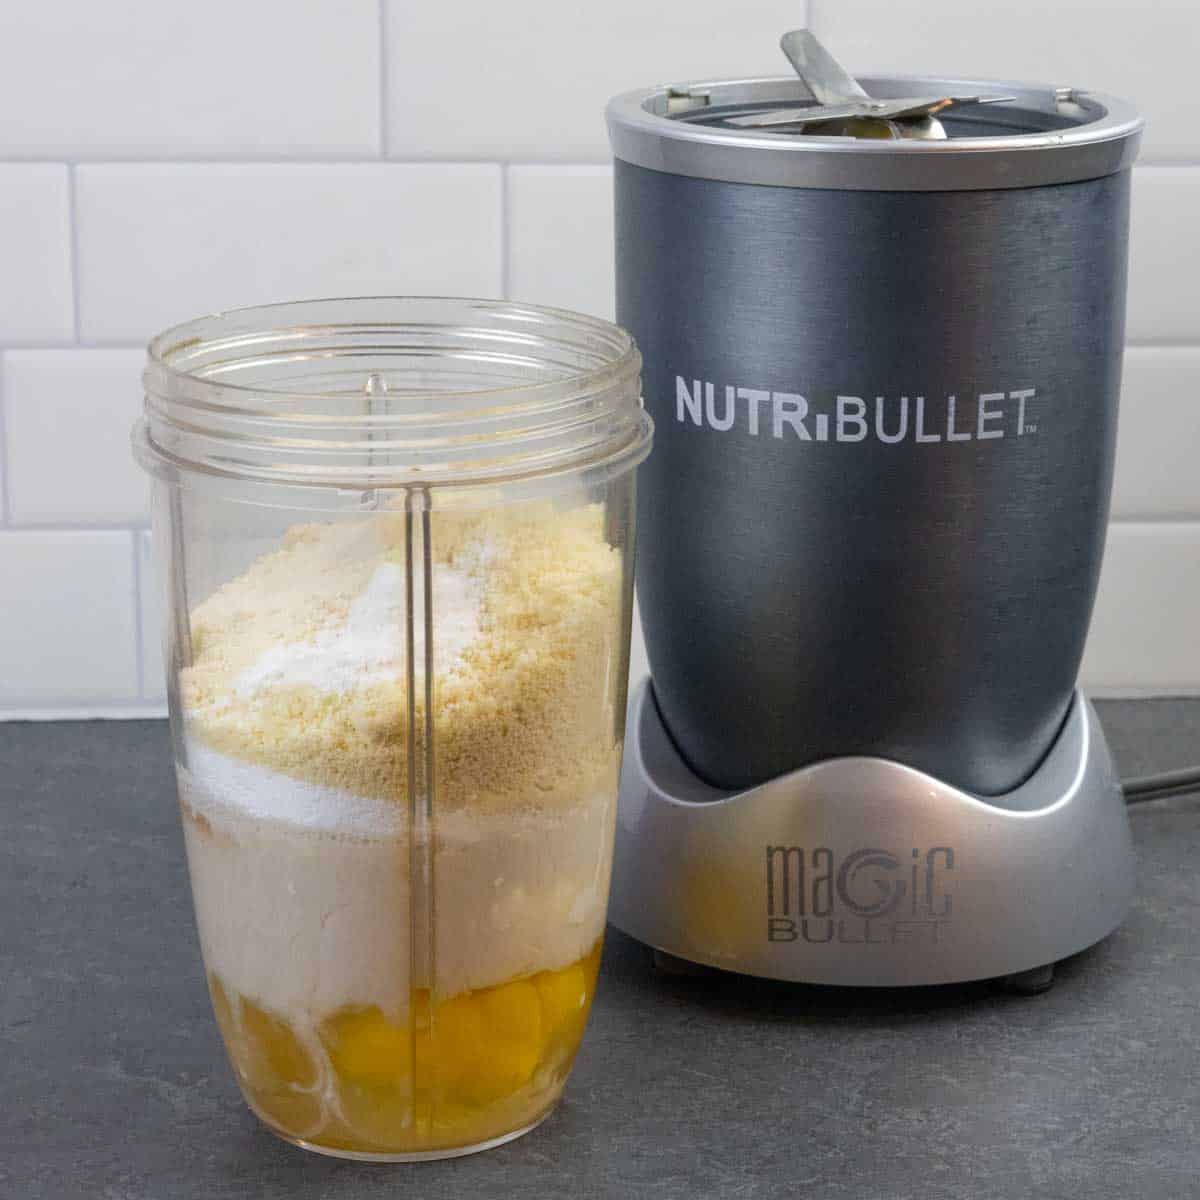 Raw ingredients for clafoutis layered in a blender cup next to a Nutribullet blender.